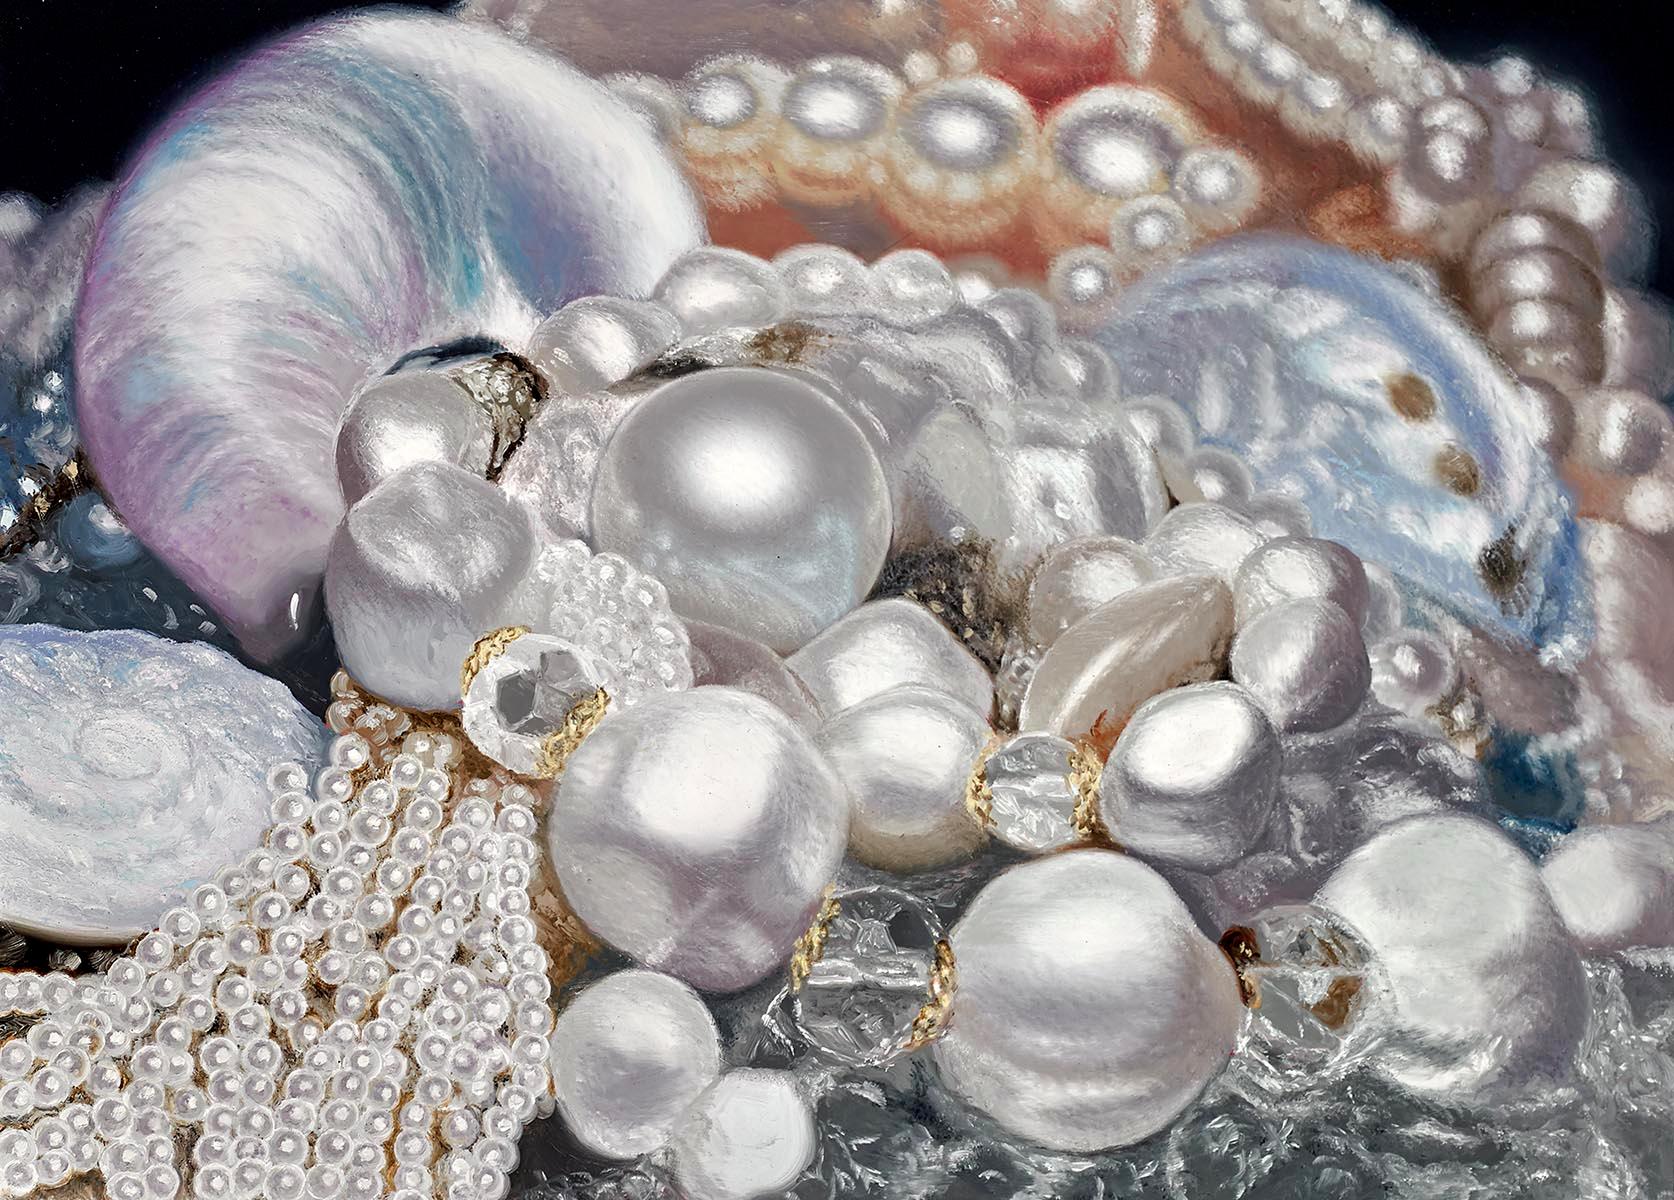 Oceanic Pearls - Painting by Ben Weiner